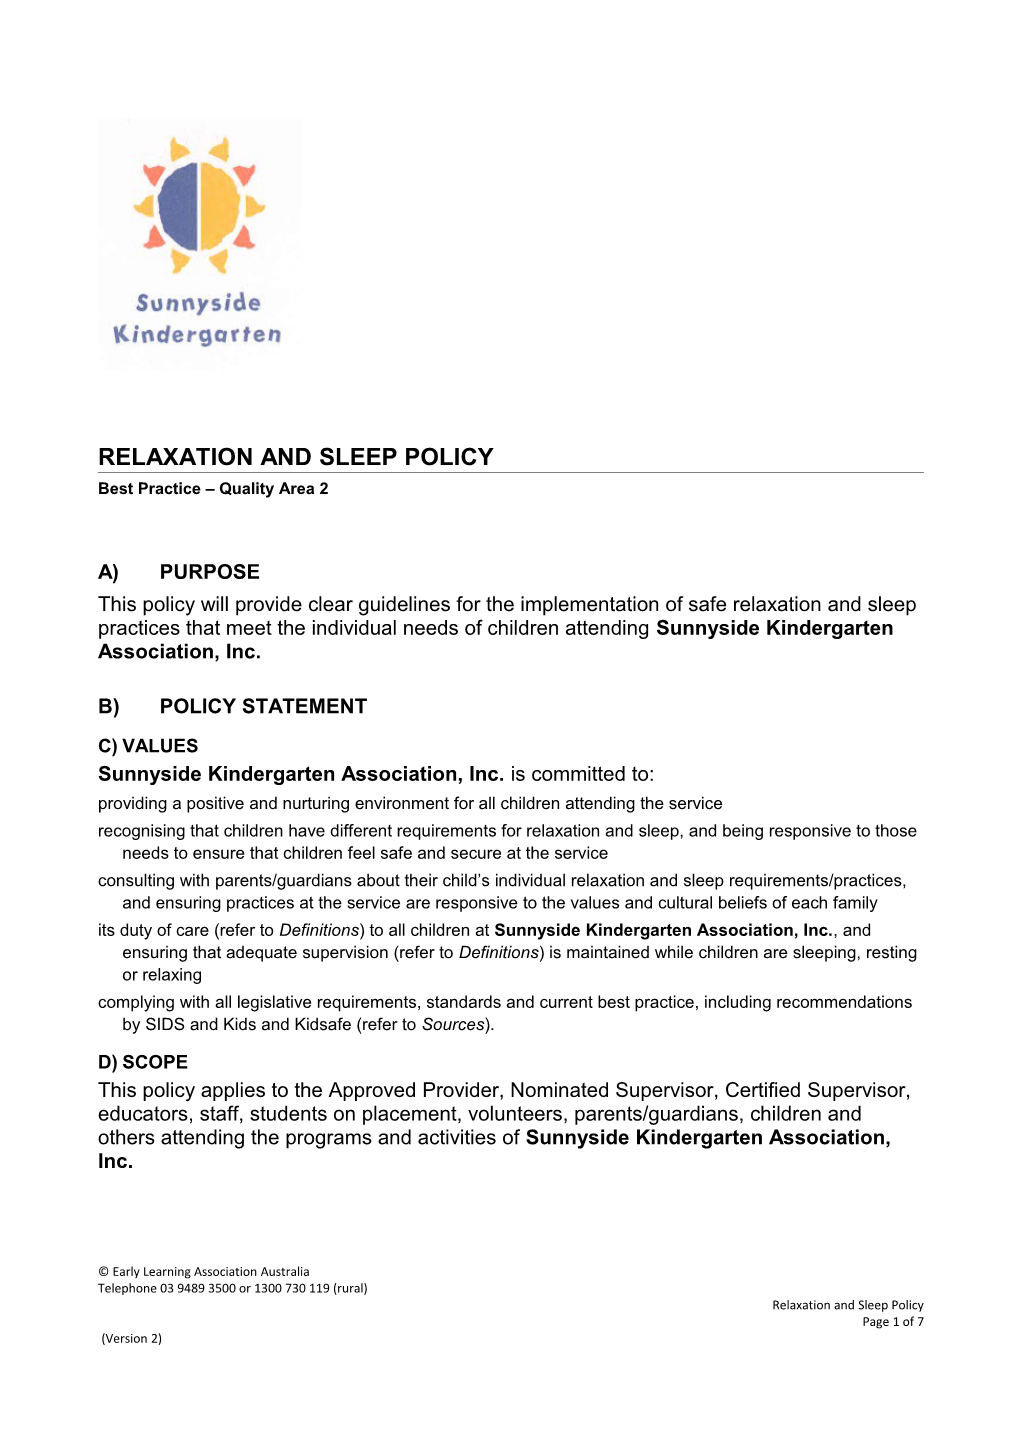 Relaxation and Sleep Policy